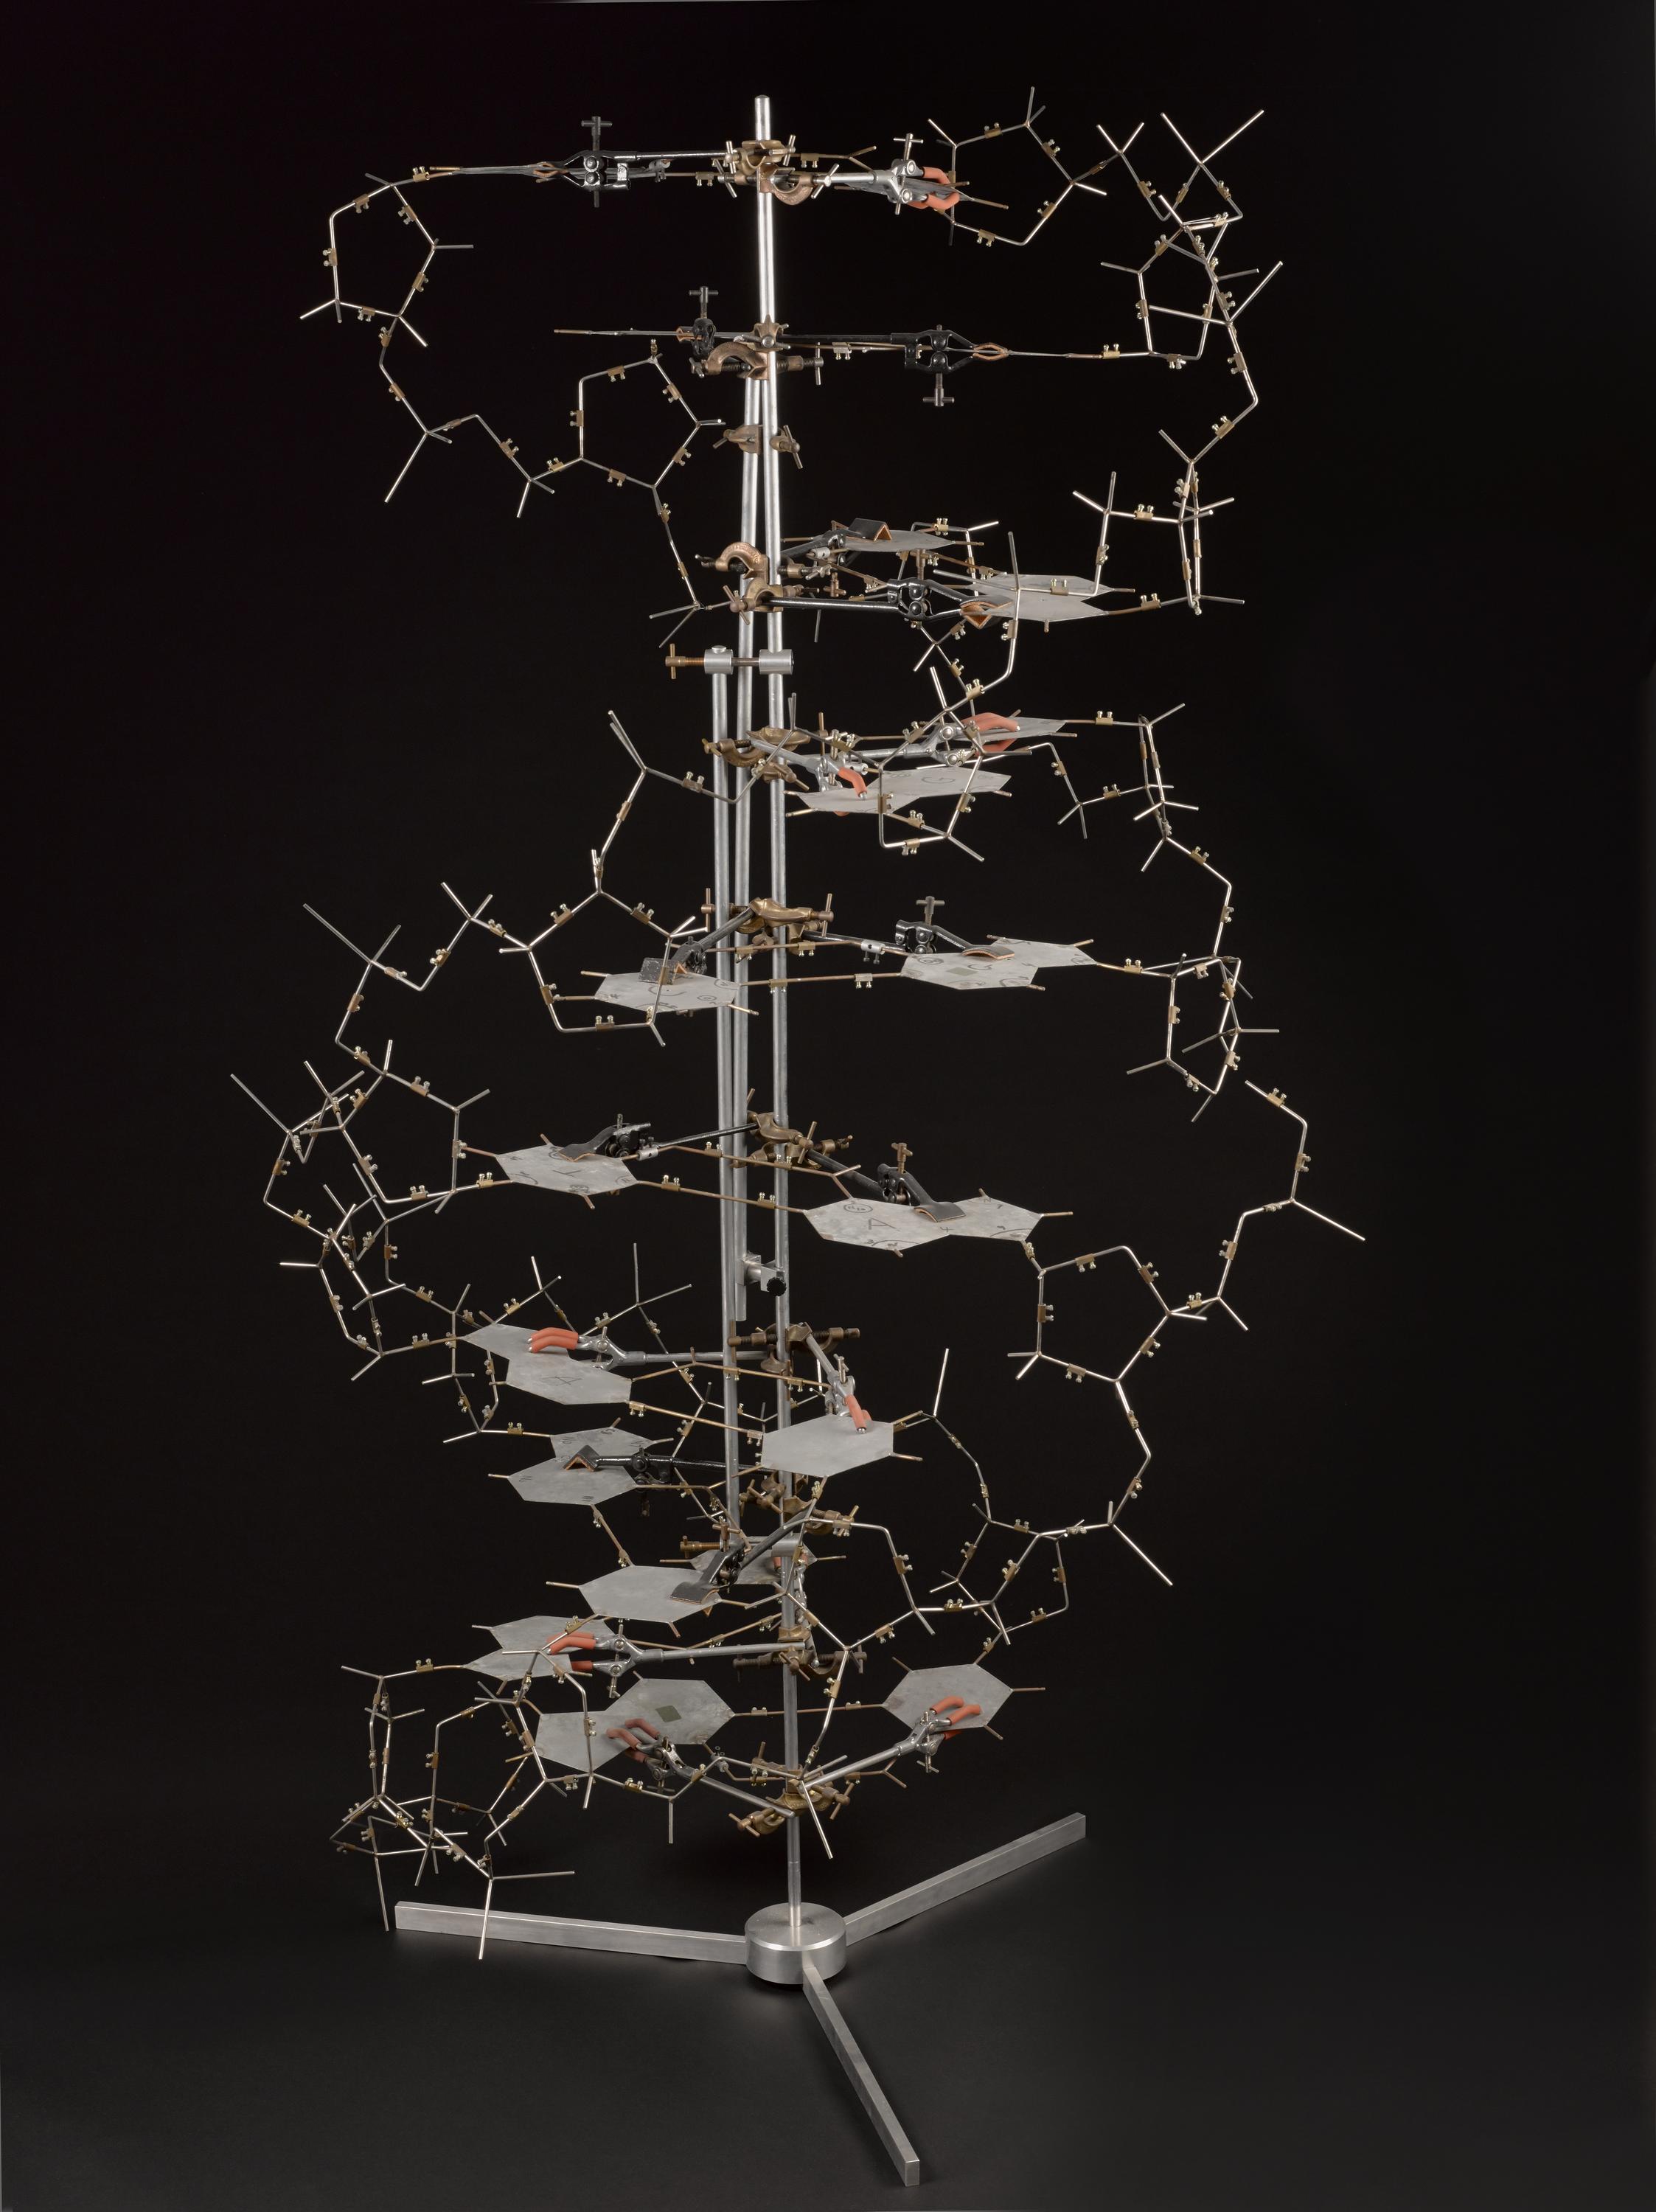 Replica of the Crick and Watson DNA model, by Science Museum, Workshops, South Kensington, London, England, 1996